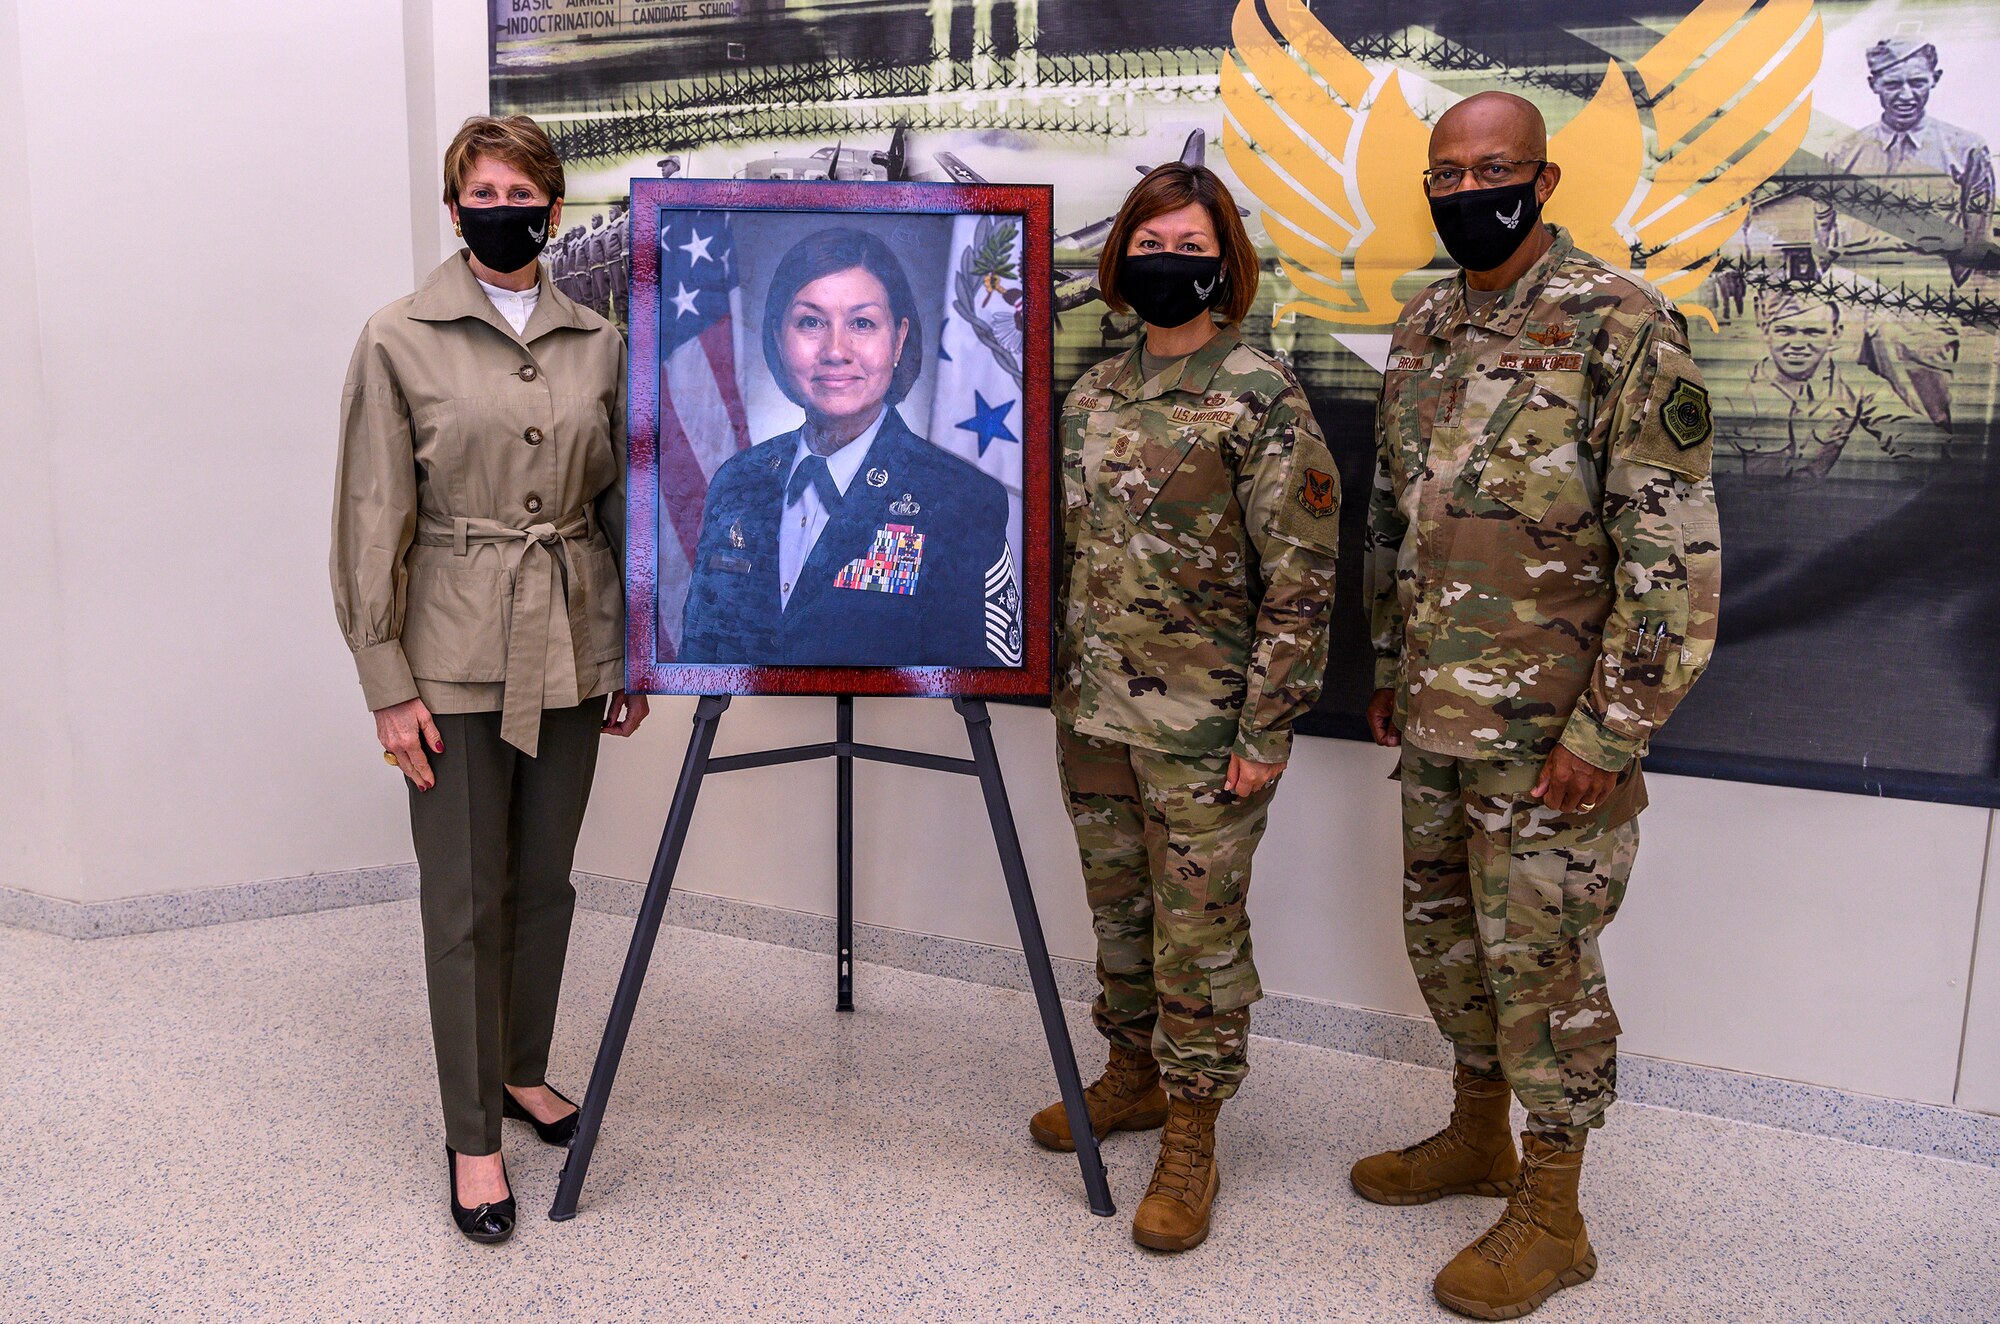 U.S. Secretary of the Air Force Barbara Barrett and Chief of Staff of the Air Force Gen. Charles Q. Brown, Jr. pose for a photo in front of Chief Master Sergeant of the Air Force JoAnne Bass's official portrait Aug. 21, 2020, at Joint Base San Antonio-Lackland, Texas.